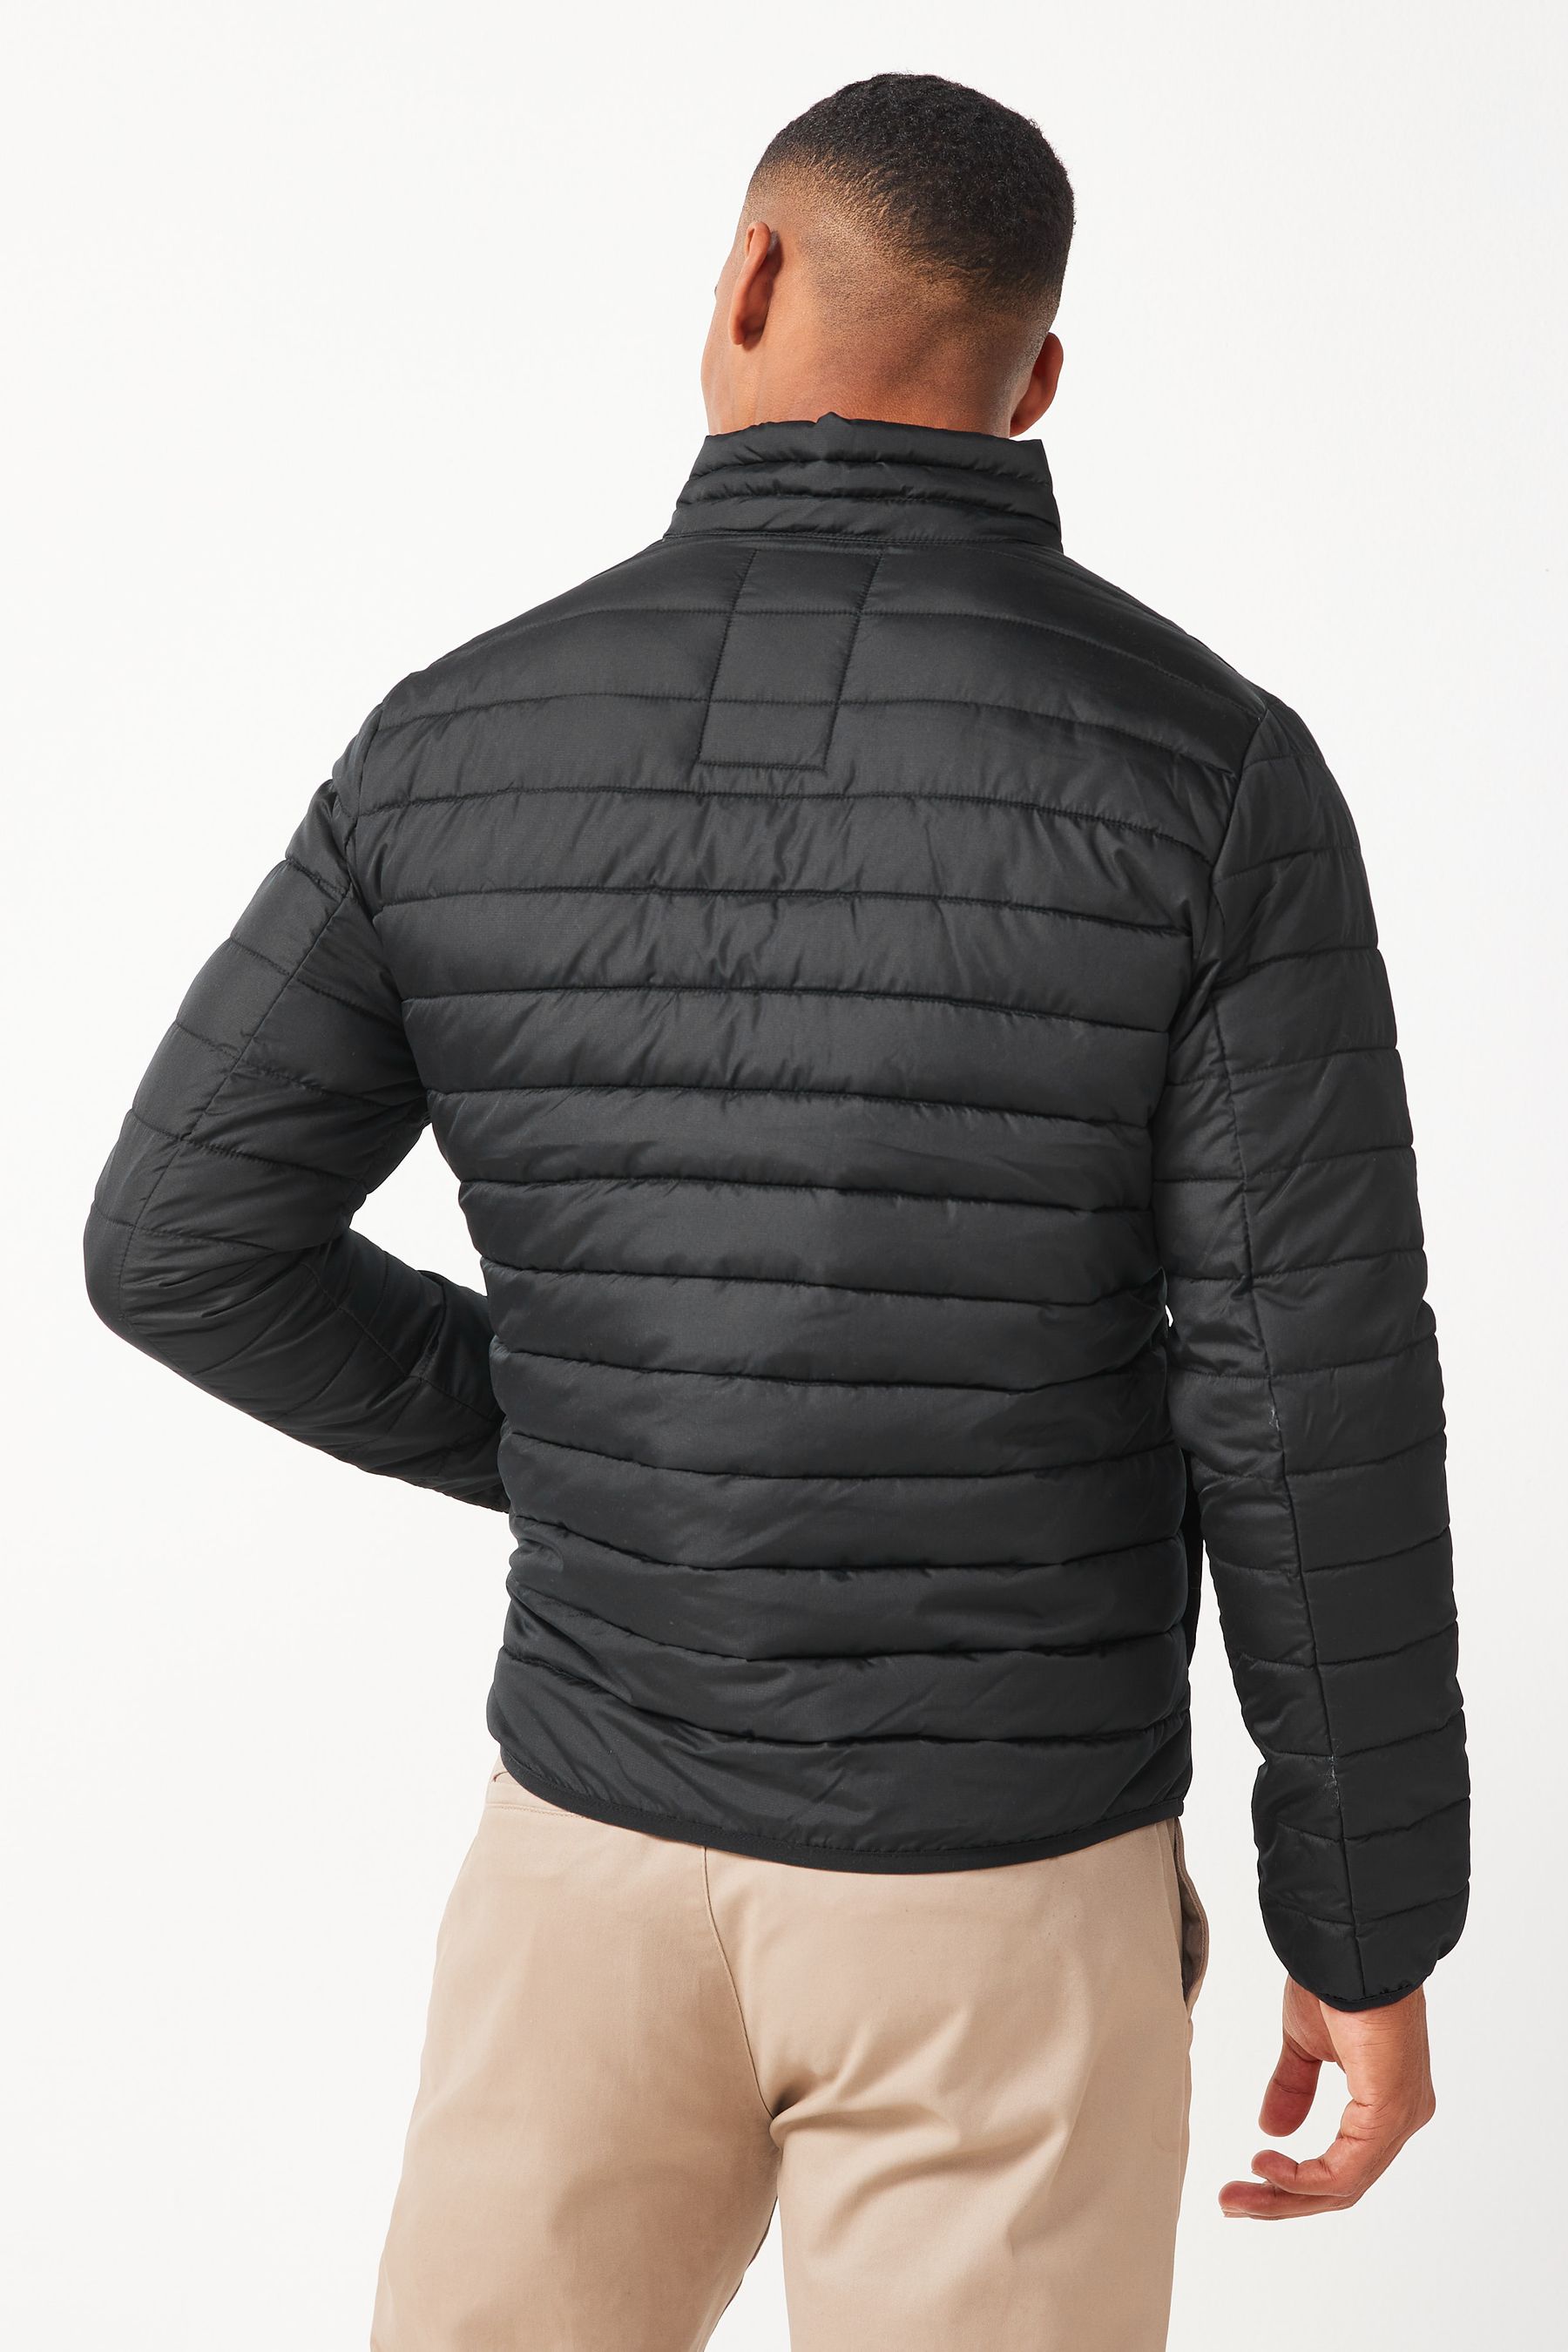 Buy Black ColdControl Puffer Jacket from the Gap online shop